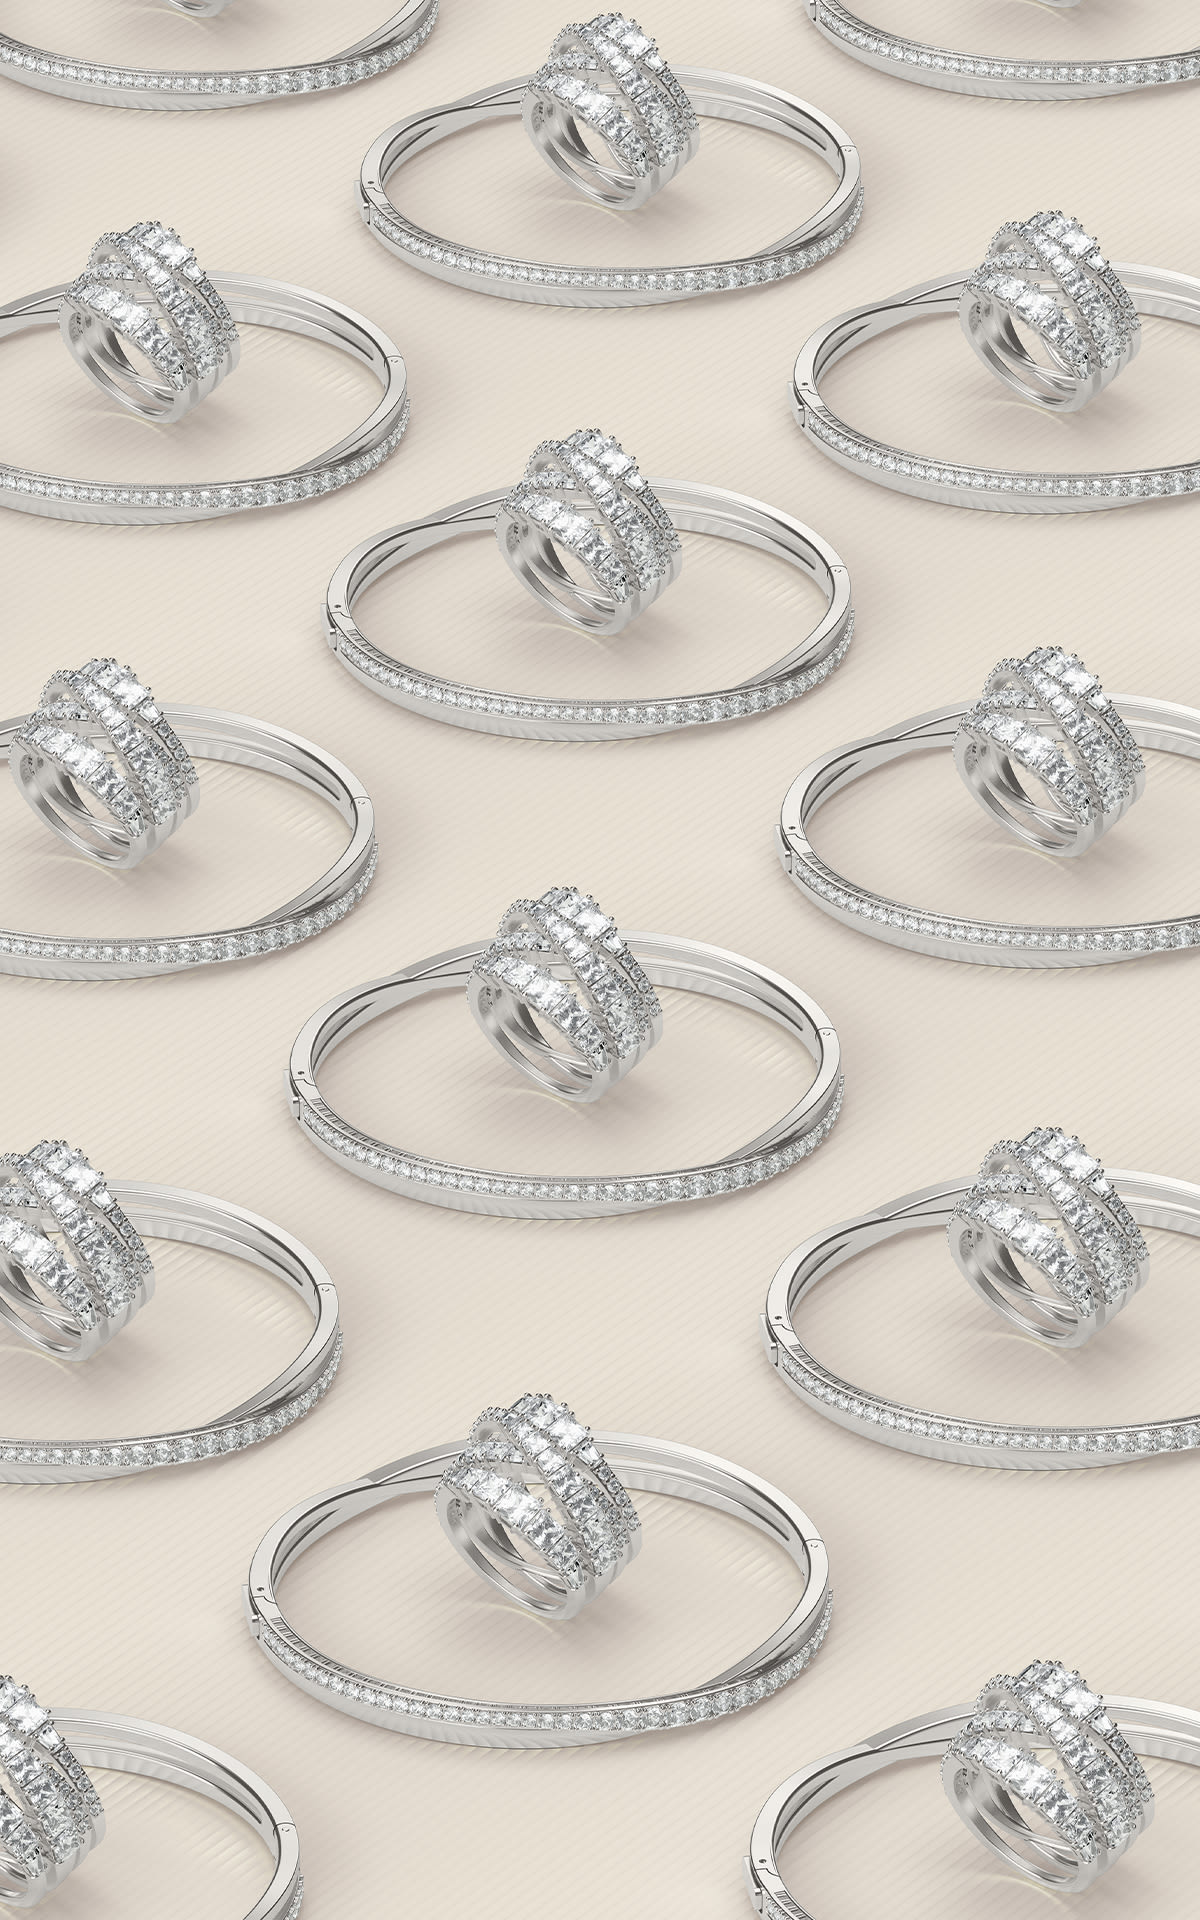 Photo silver rings and bracelets